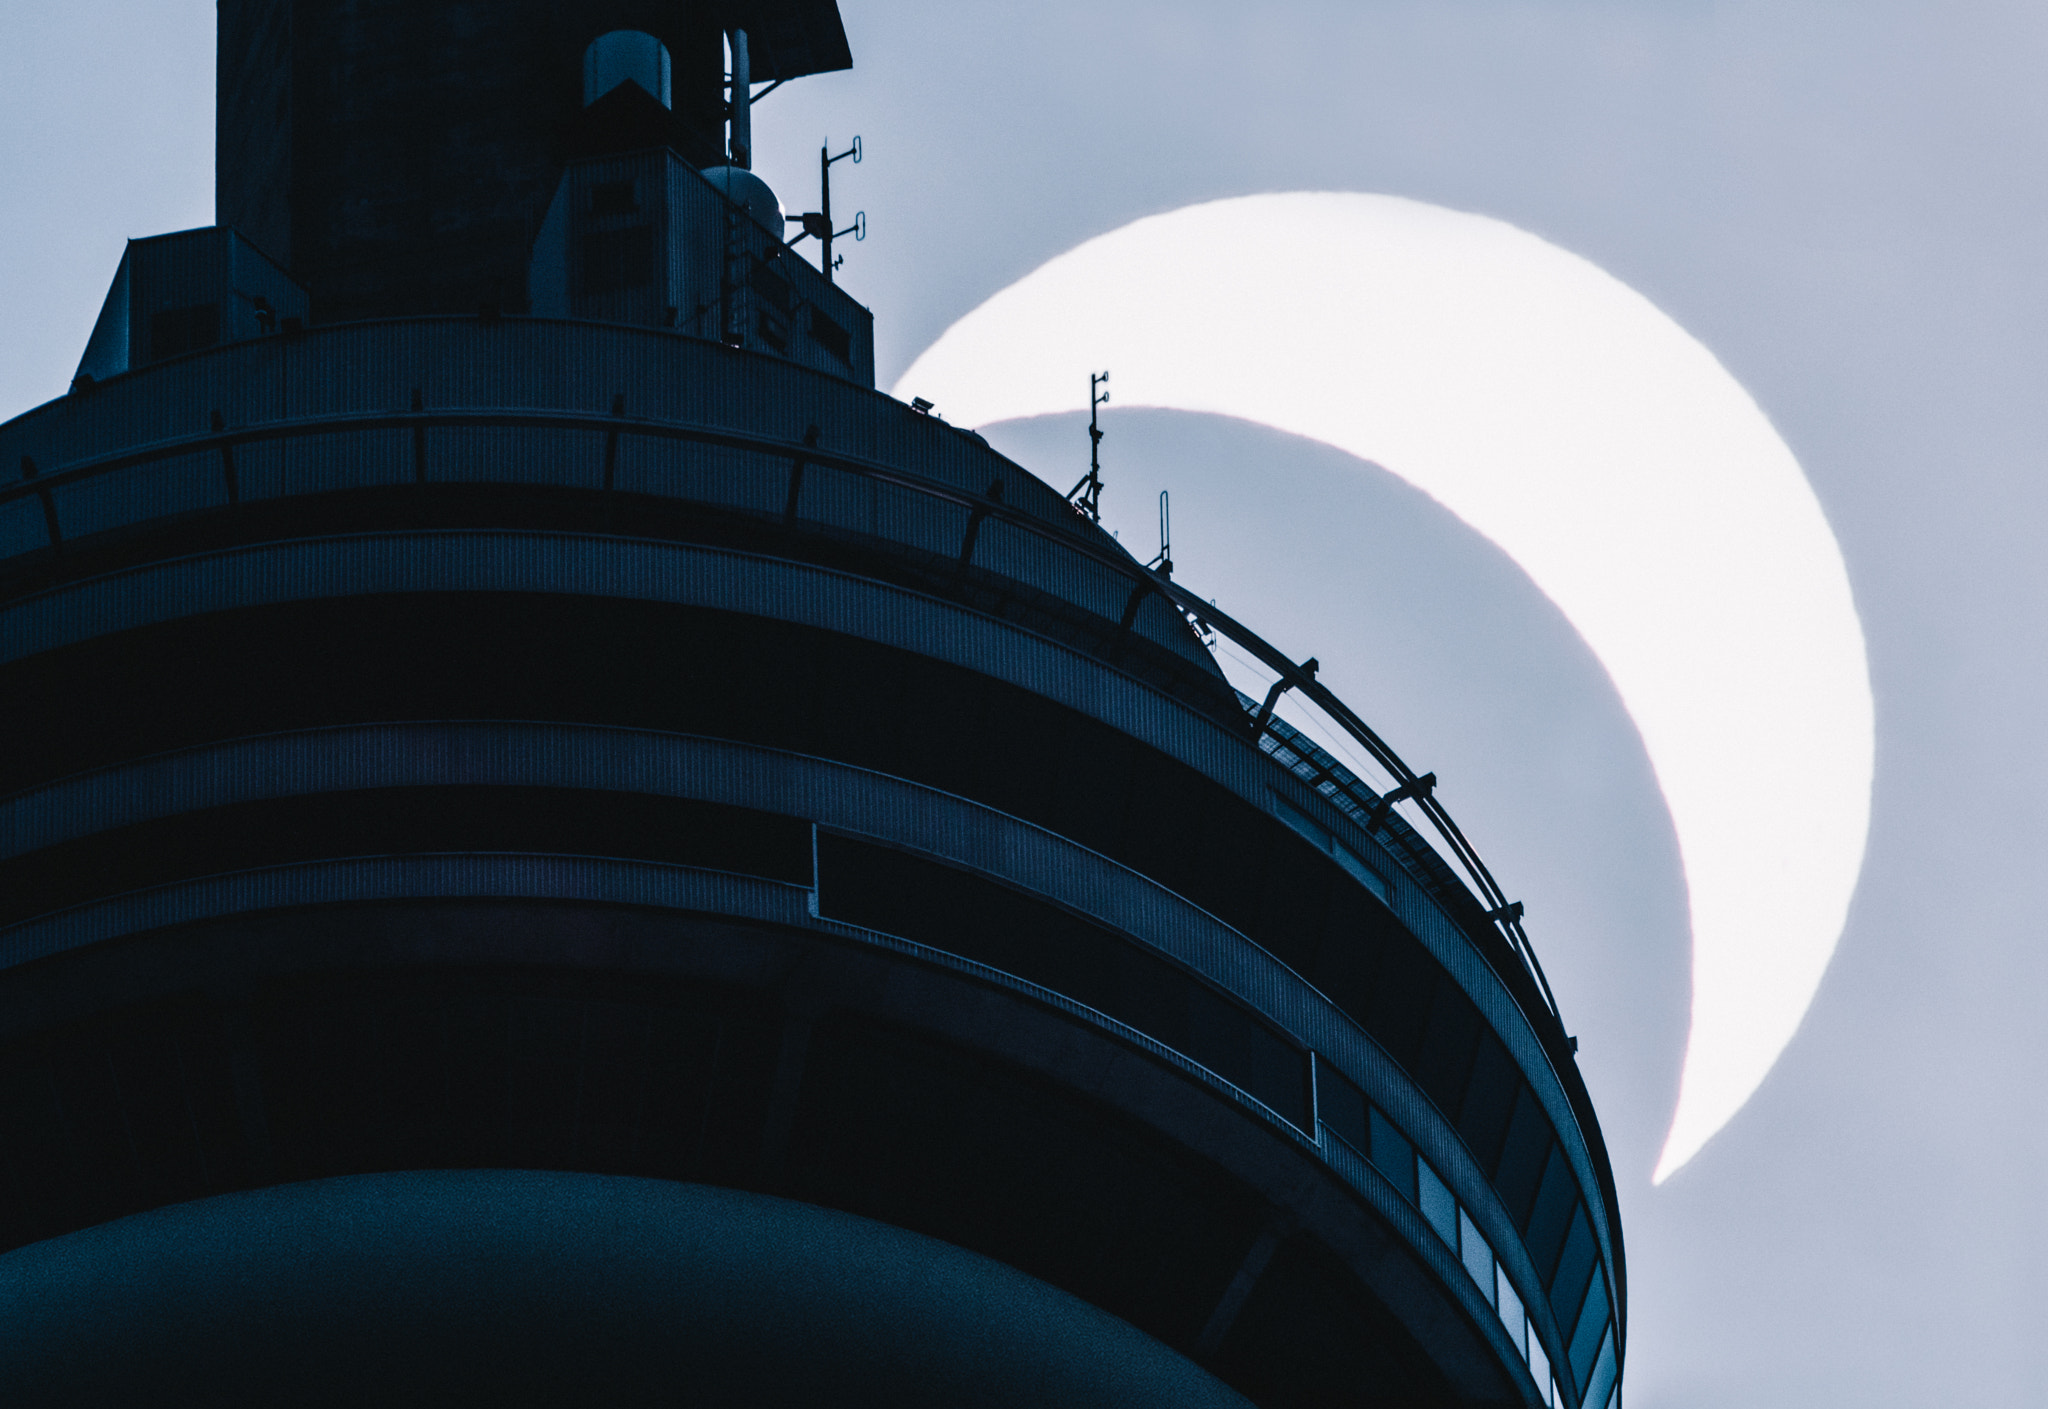 How I Shot the Eclipse & the CN Tower